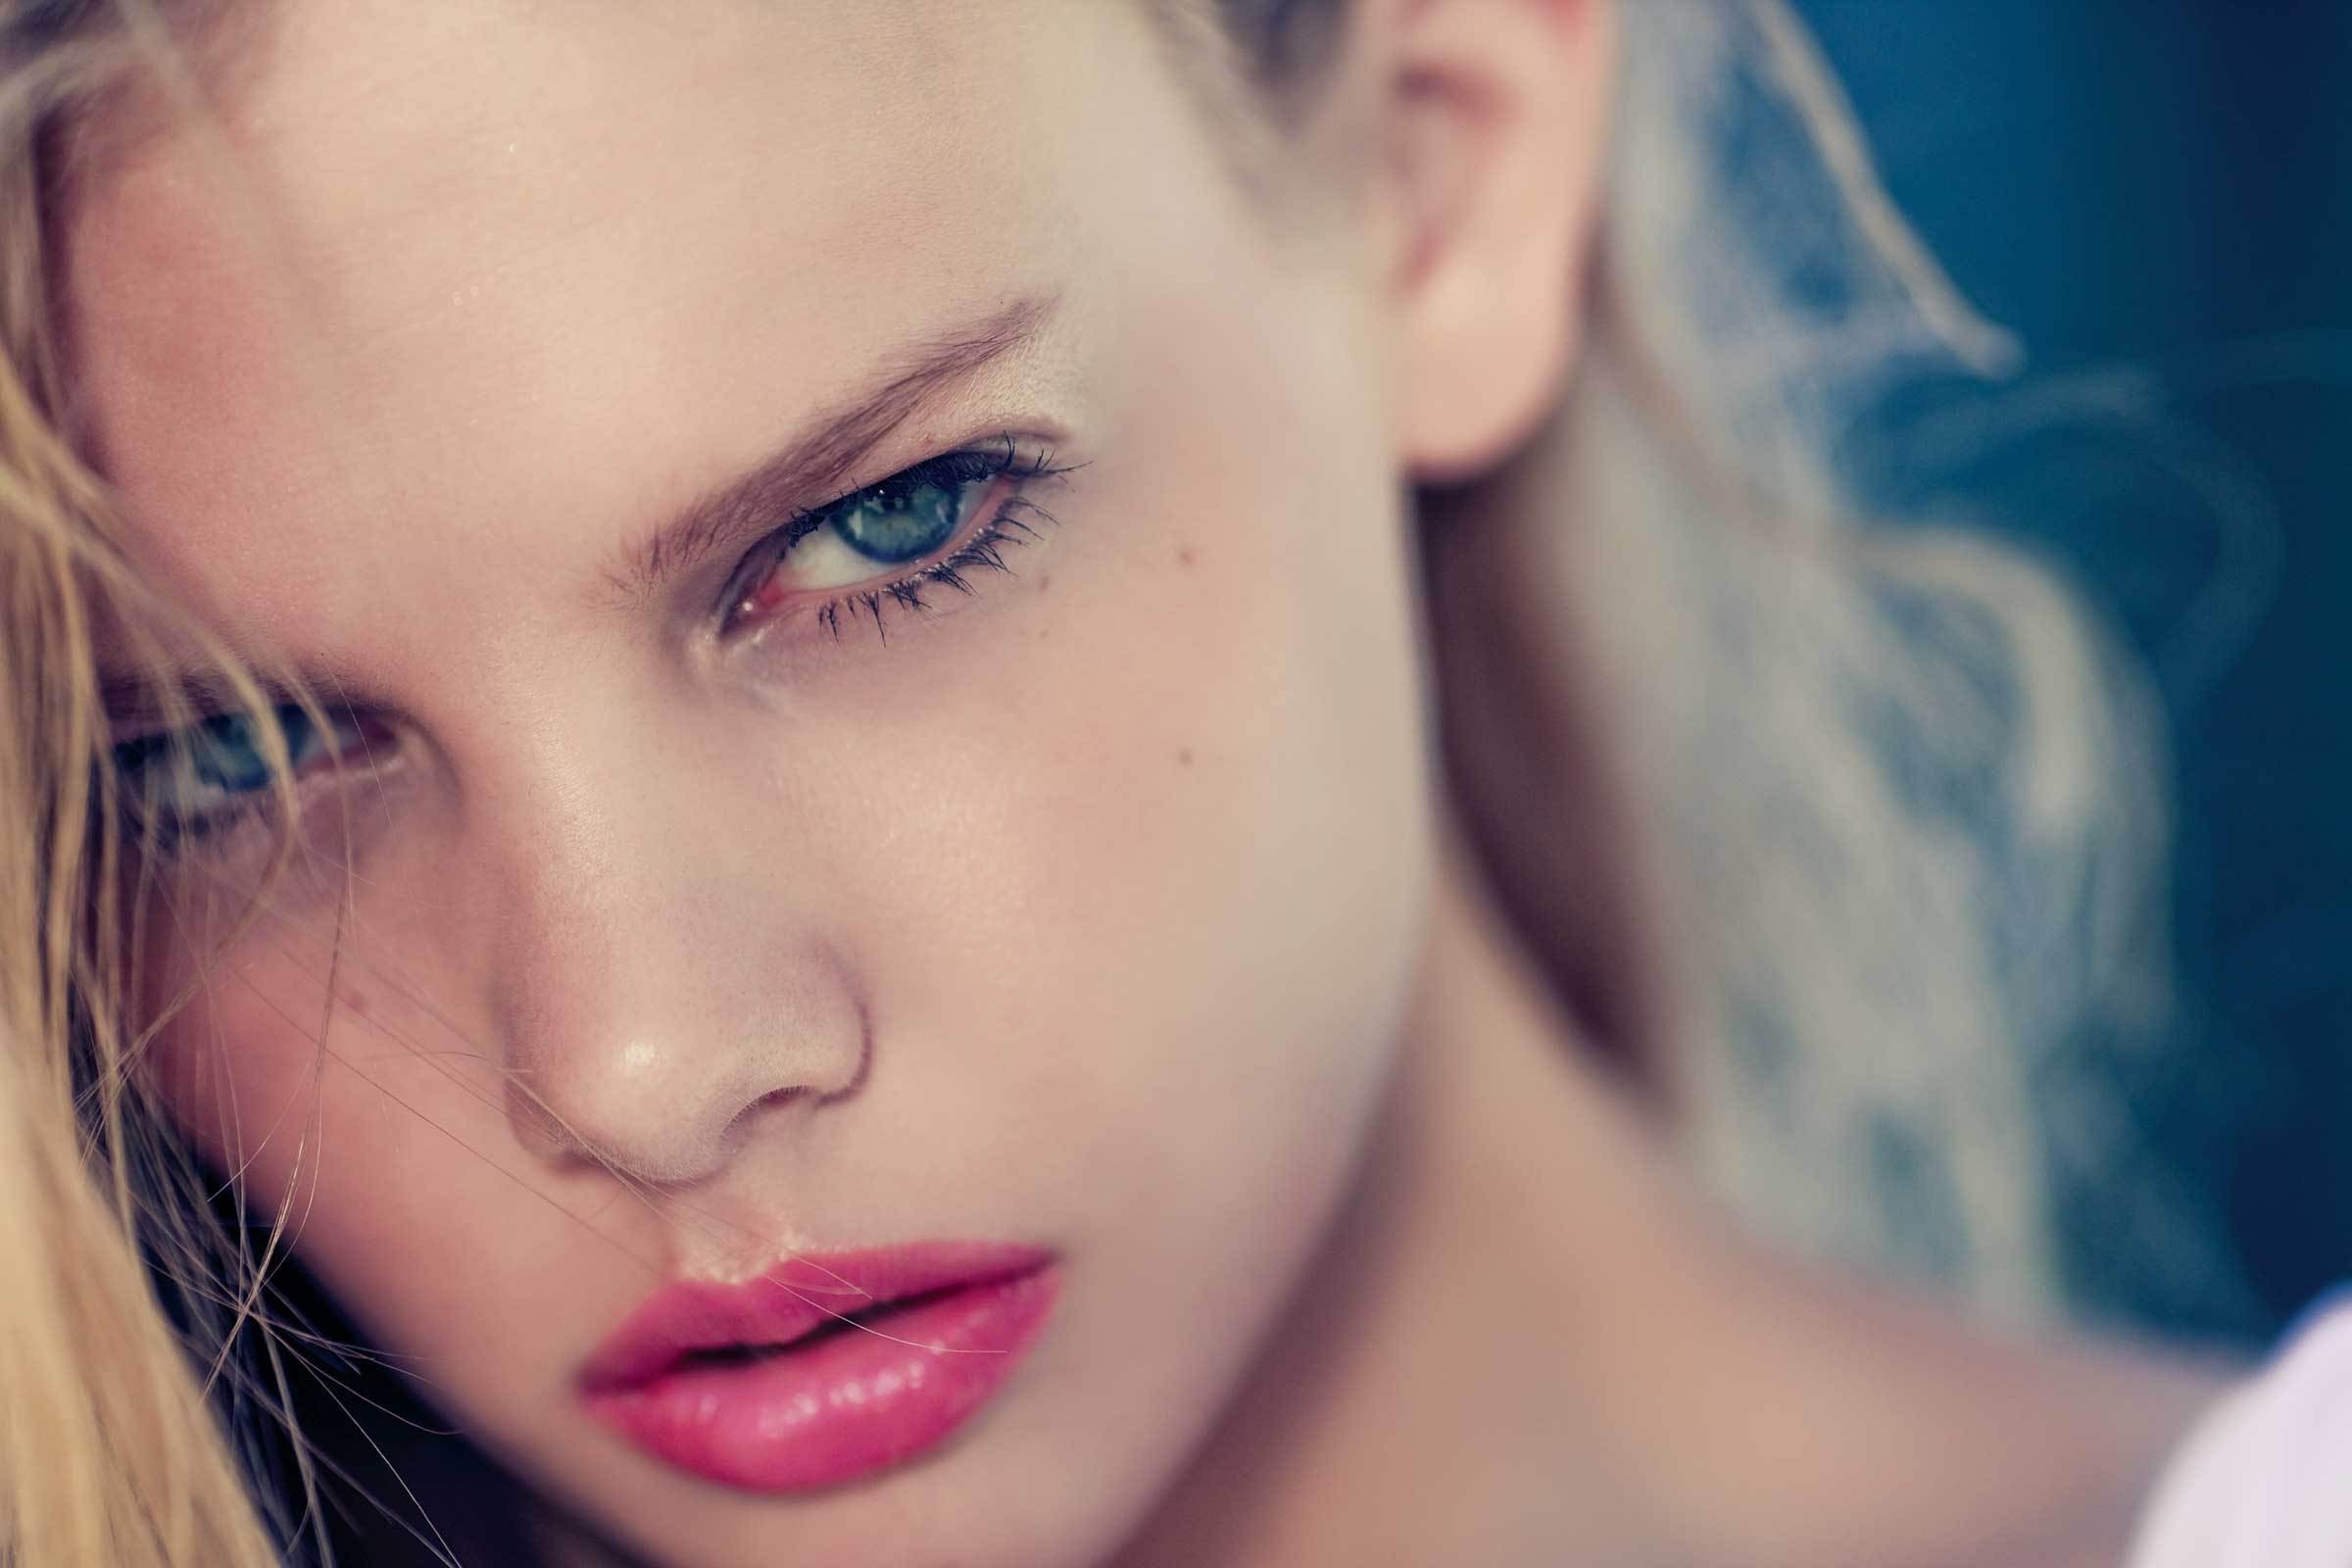 Marloes Horst Wallpapers